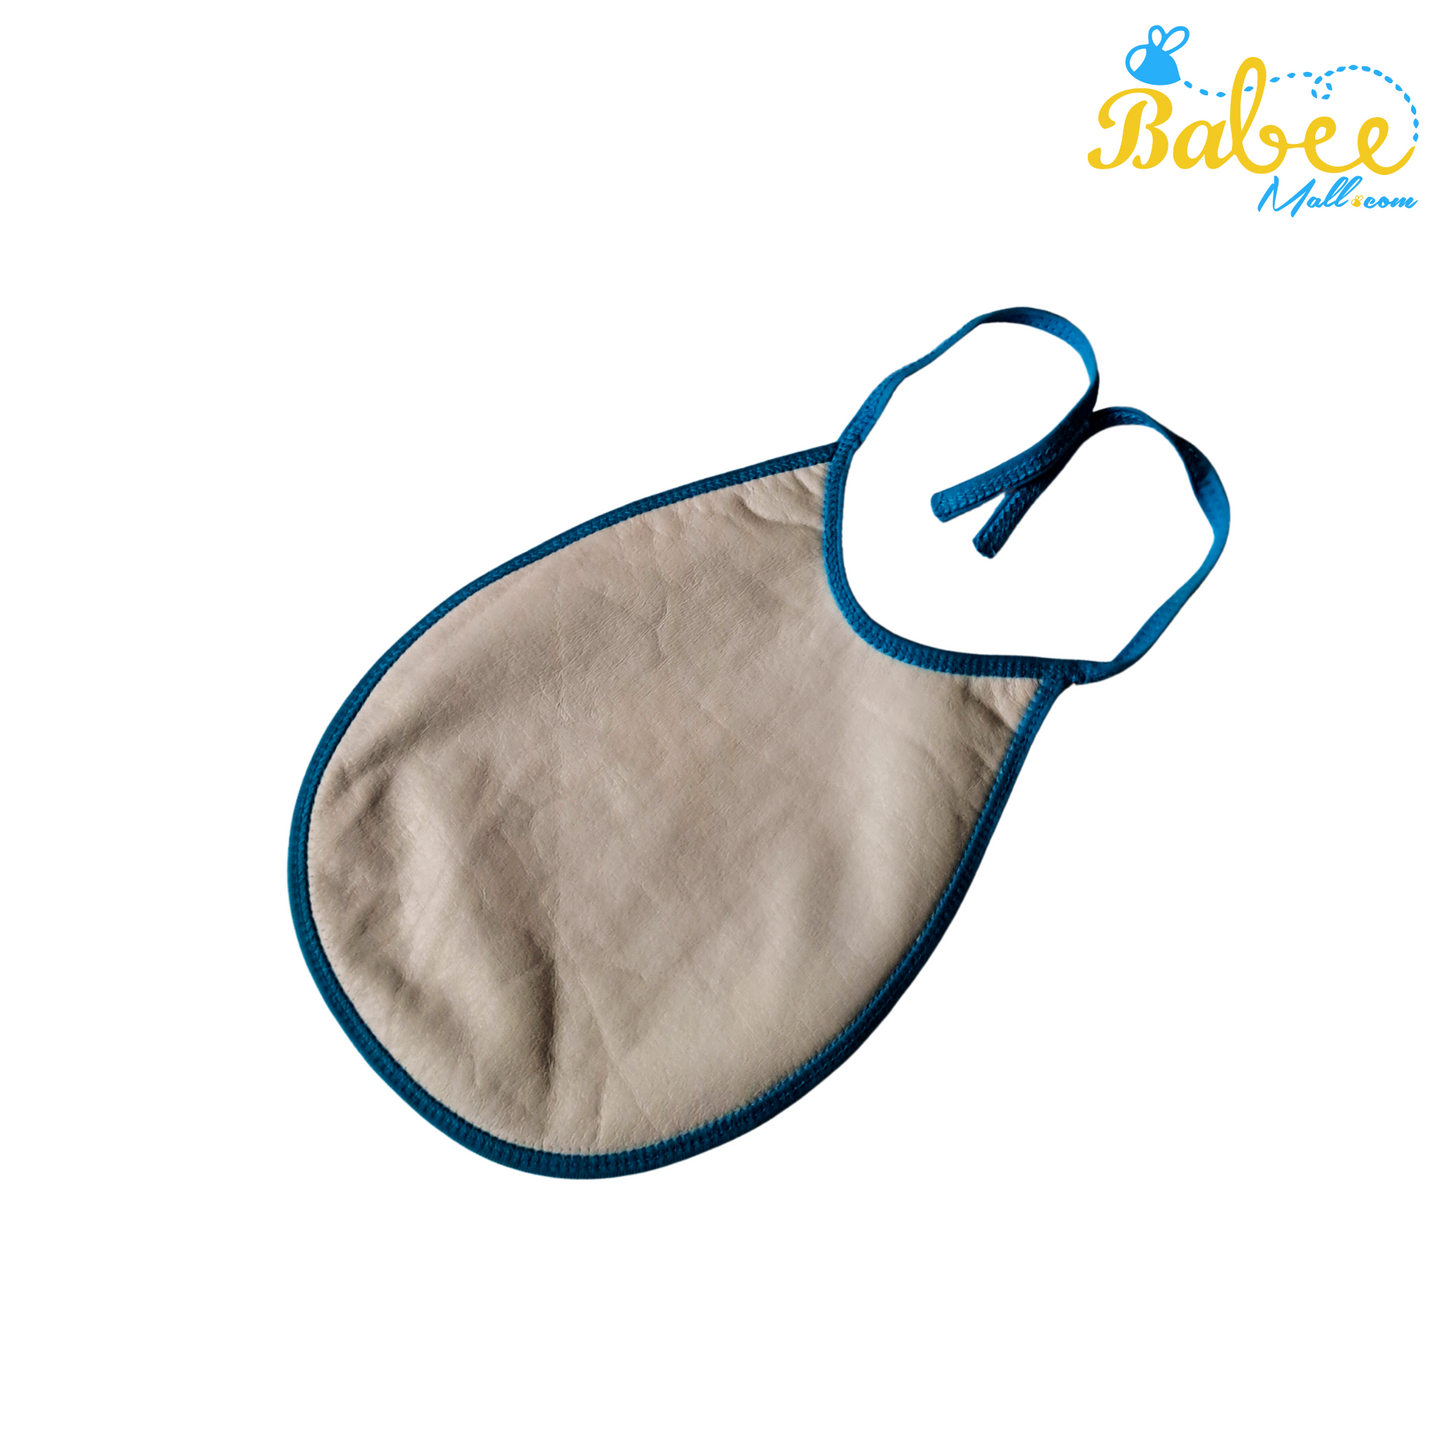 Soft and Stylish Baby Bibs - Mess-Free Meals (Oil Blue)